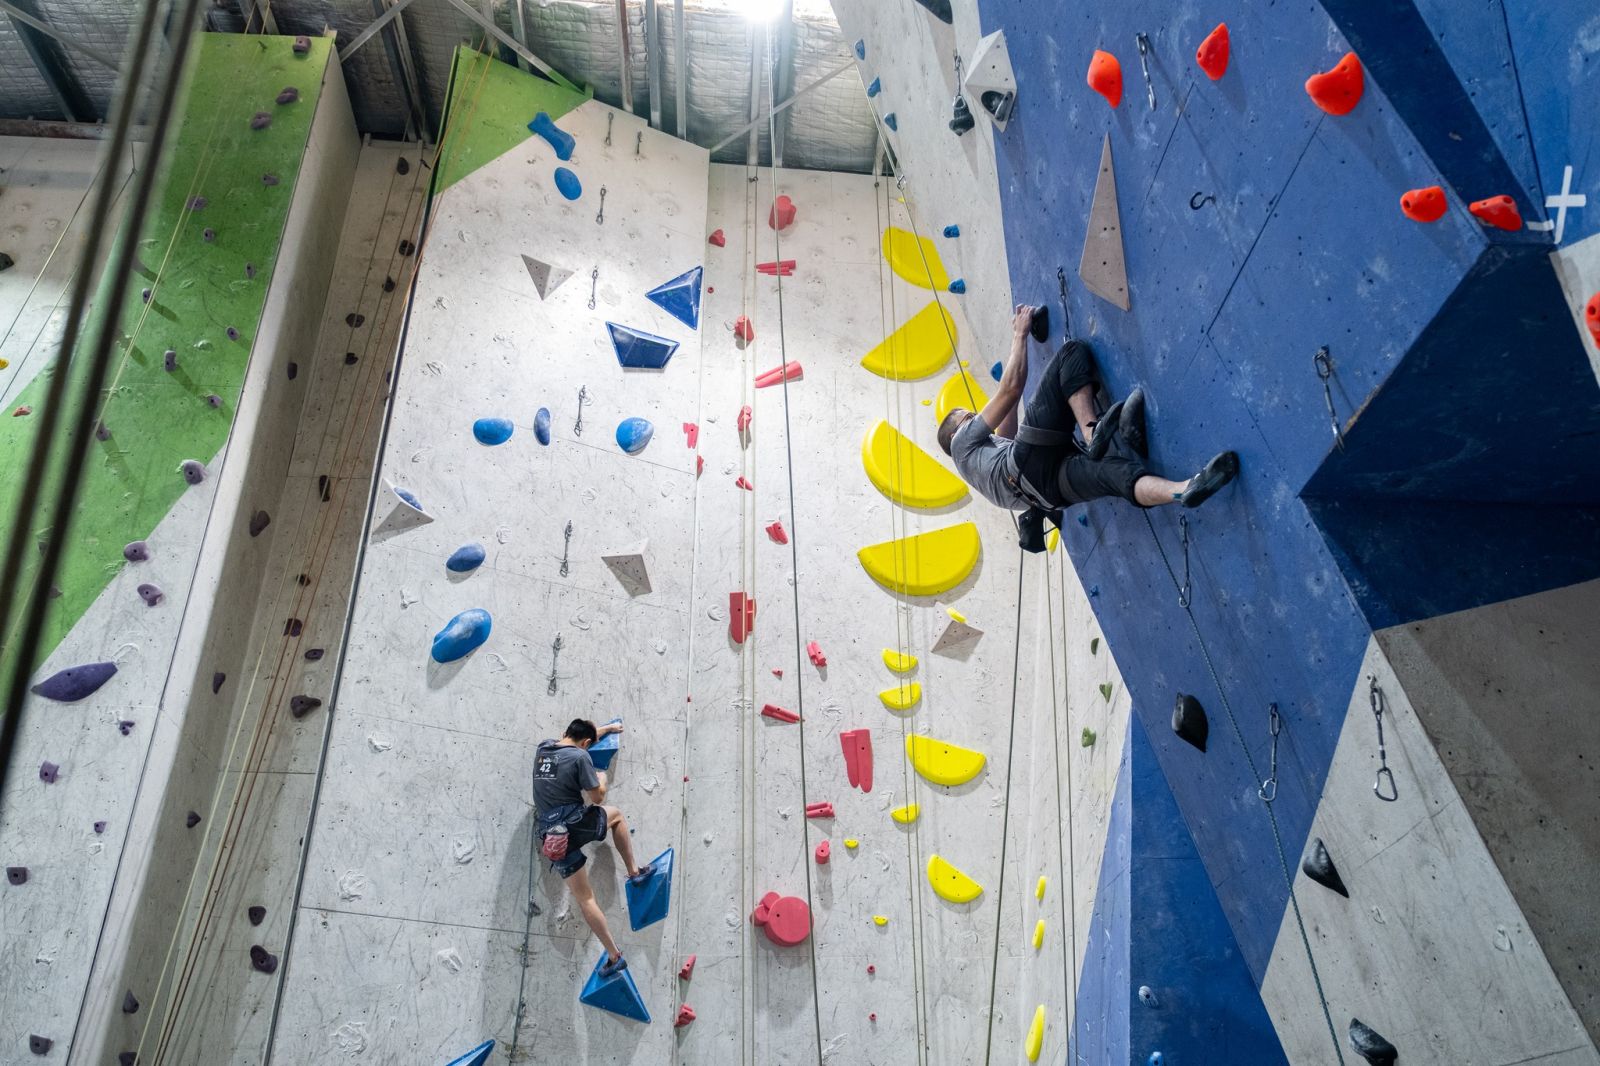 Two climbers top rope and lead climbing